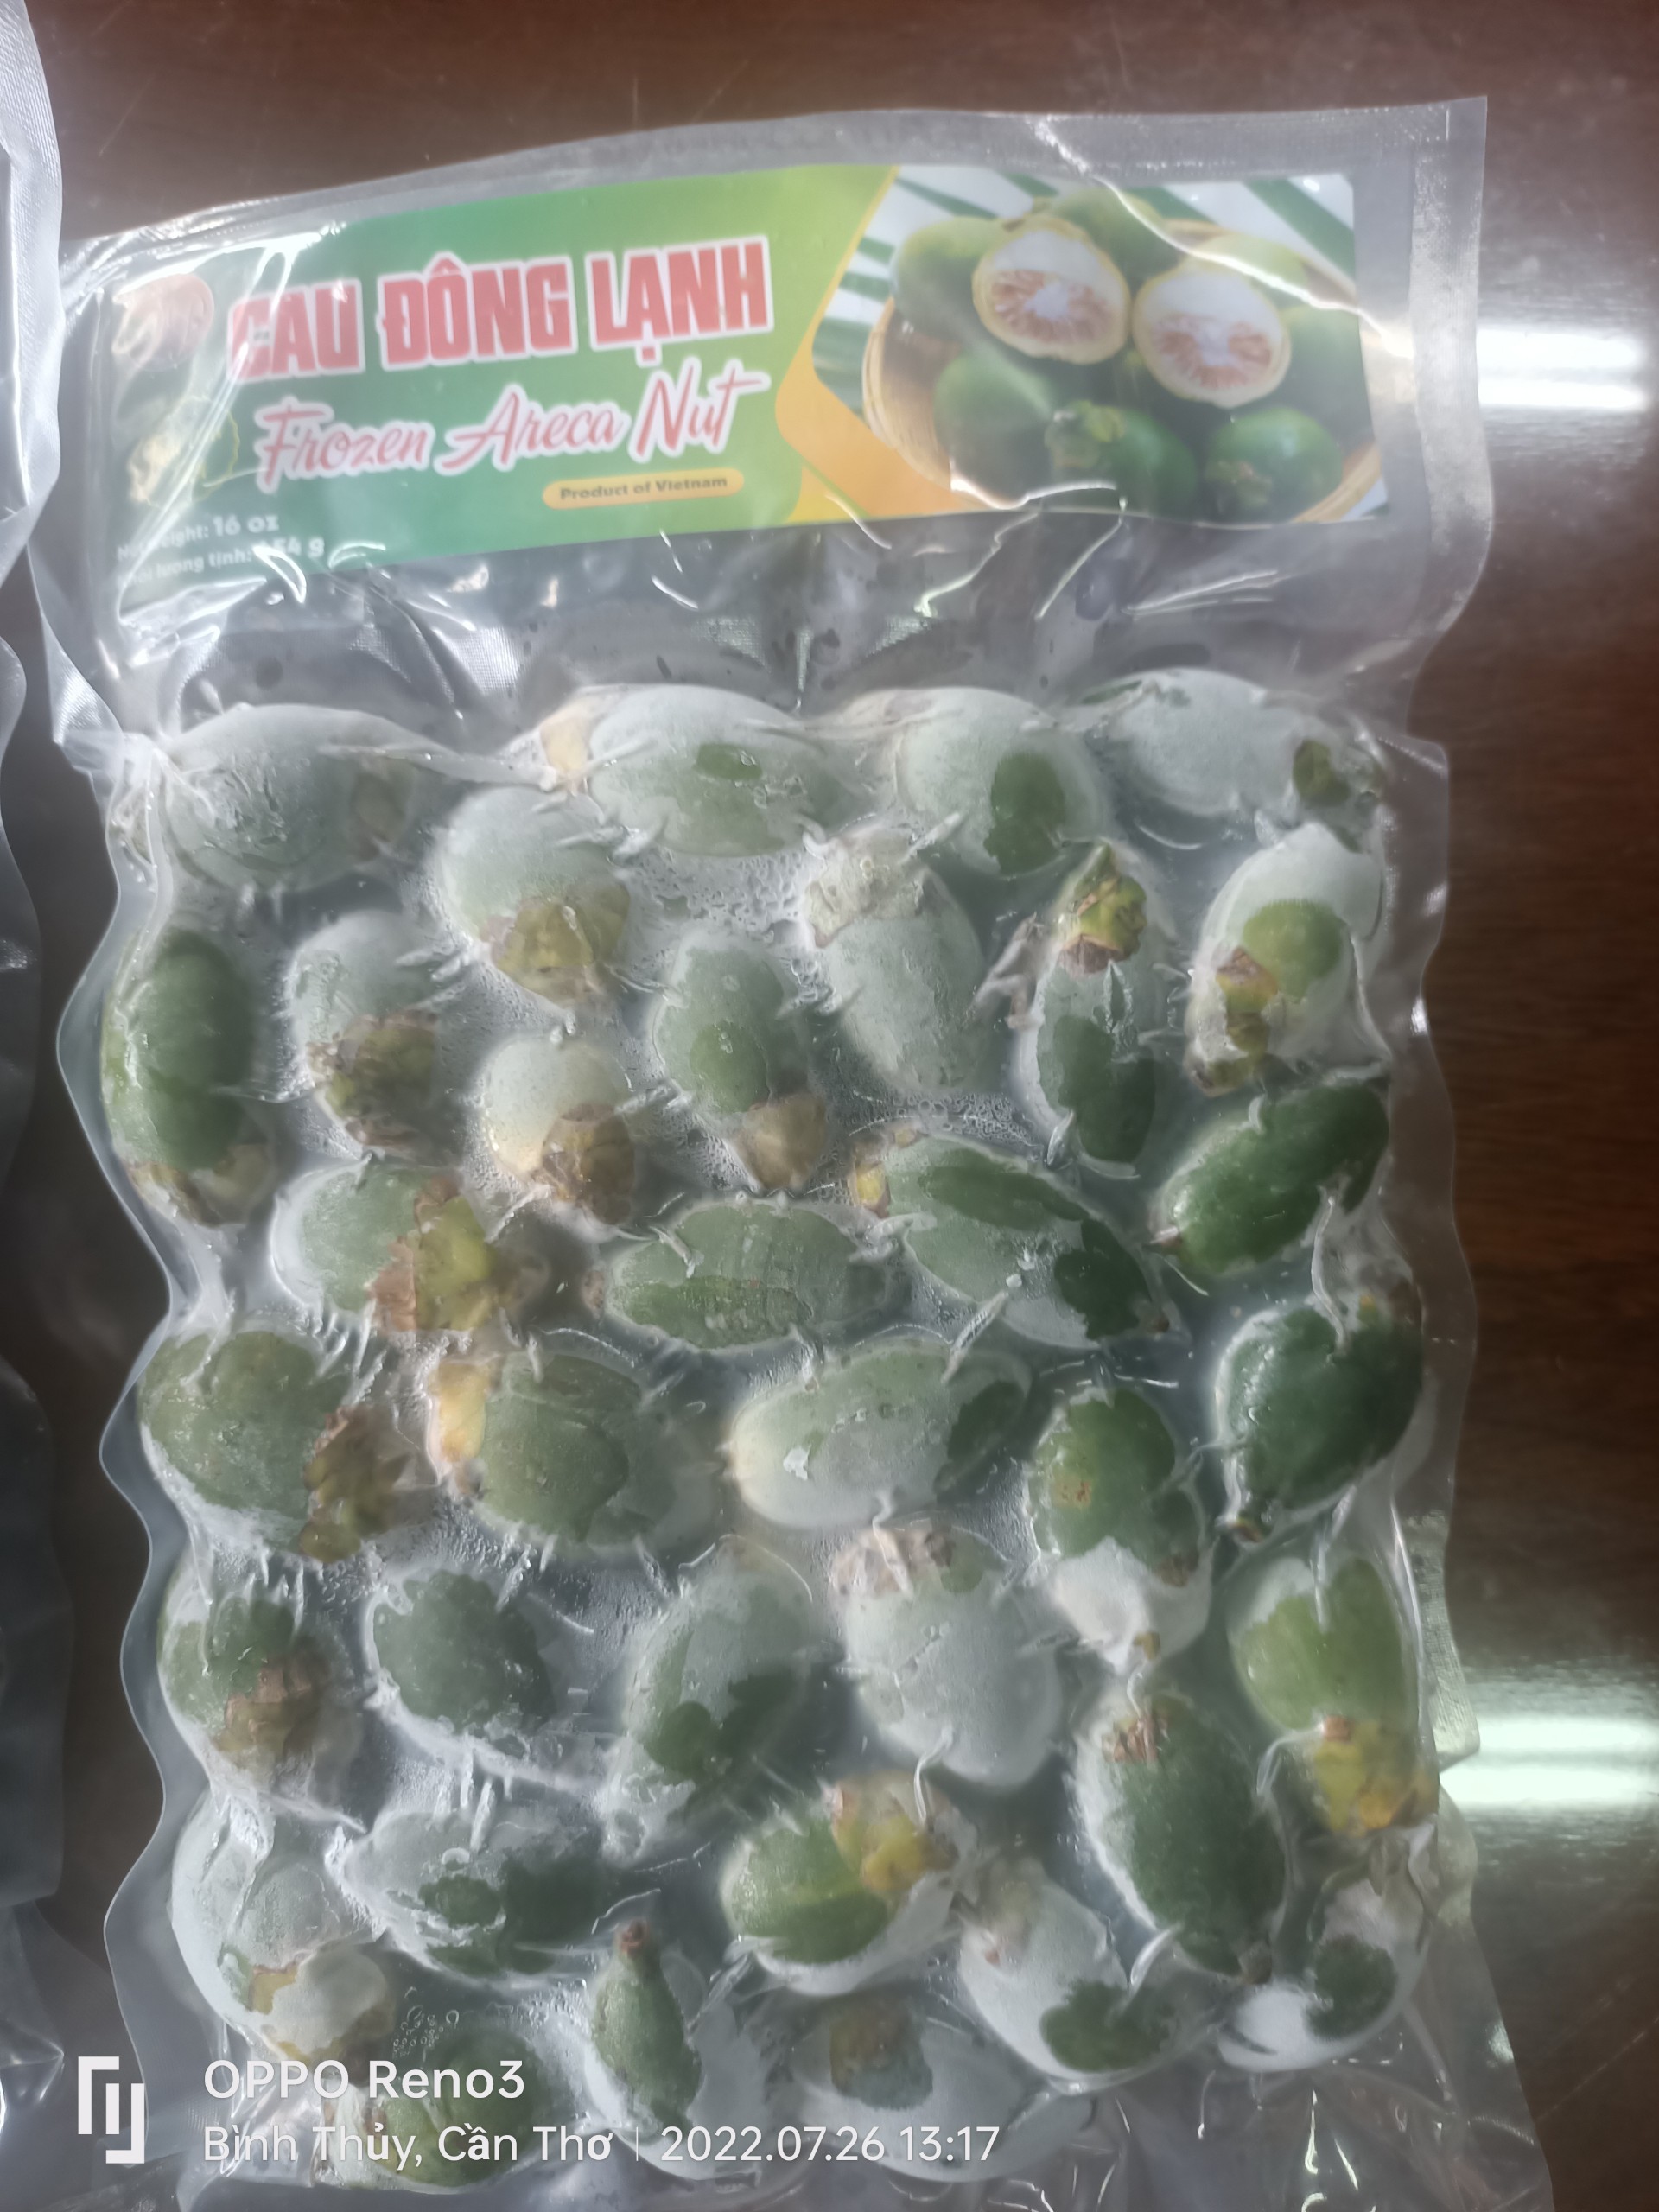 Tan Gia Thanh is one of the reputable unit to buy frozen betel nut from Vietnam